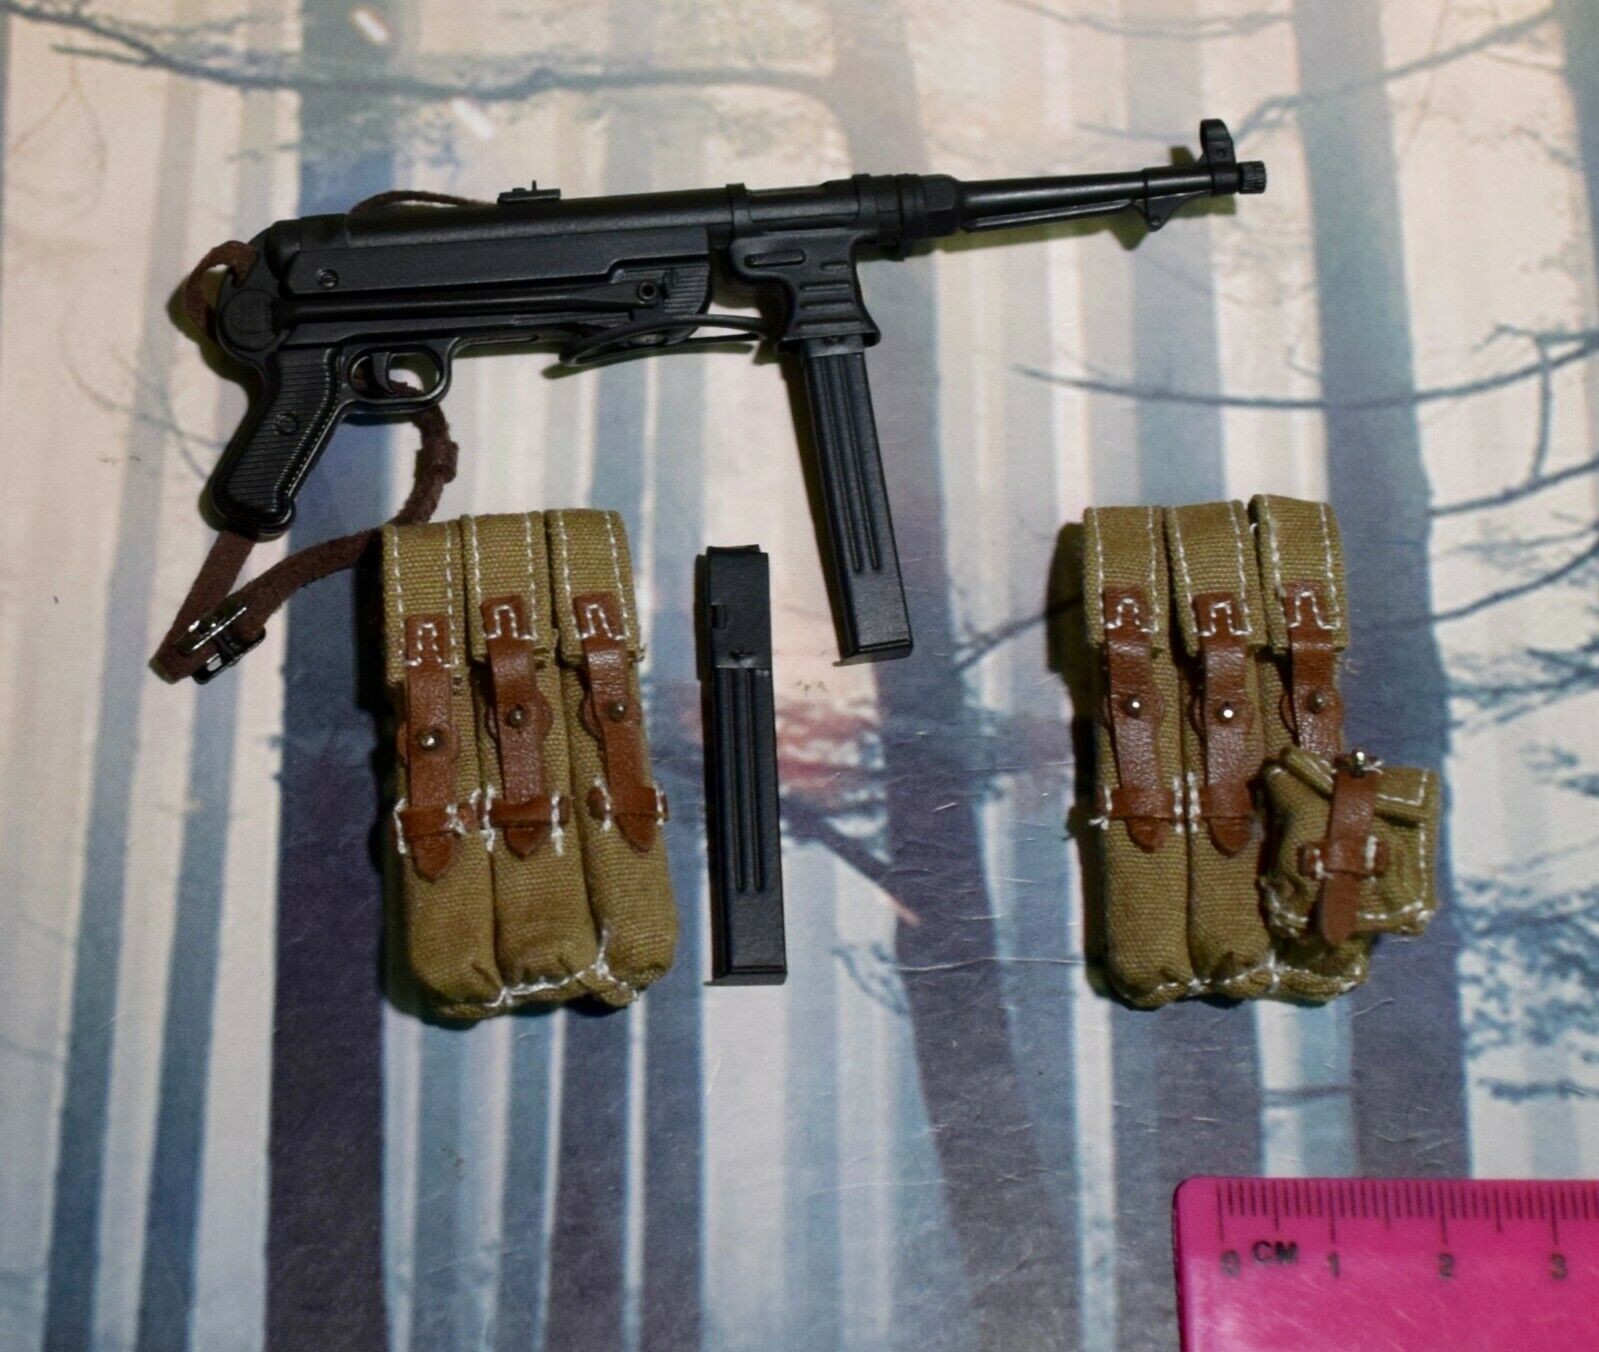 Dragon In Dreams DID 1/6 Scale WWII German MP40 & Pouches from Wilhelm D80151